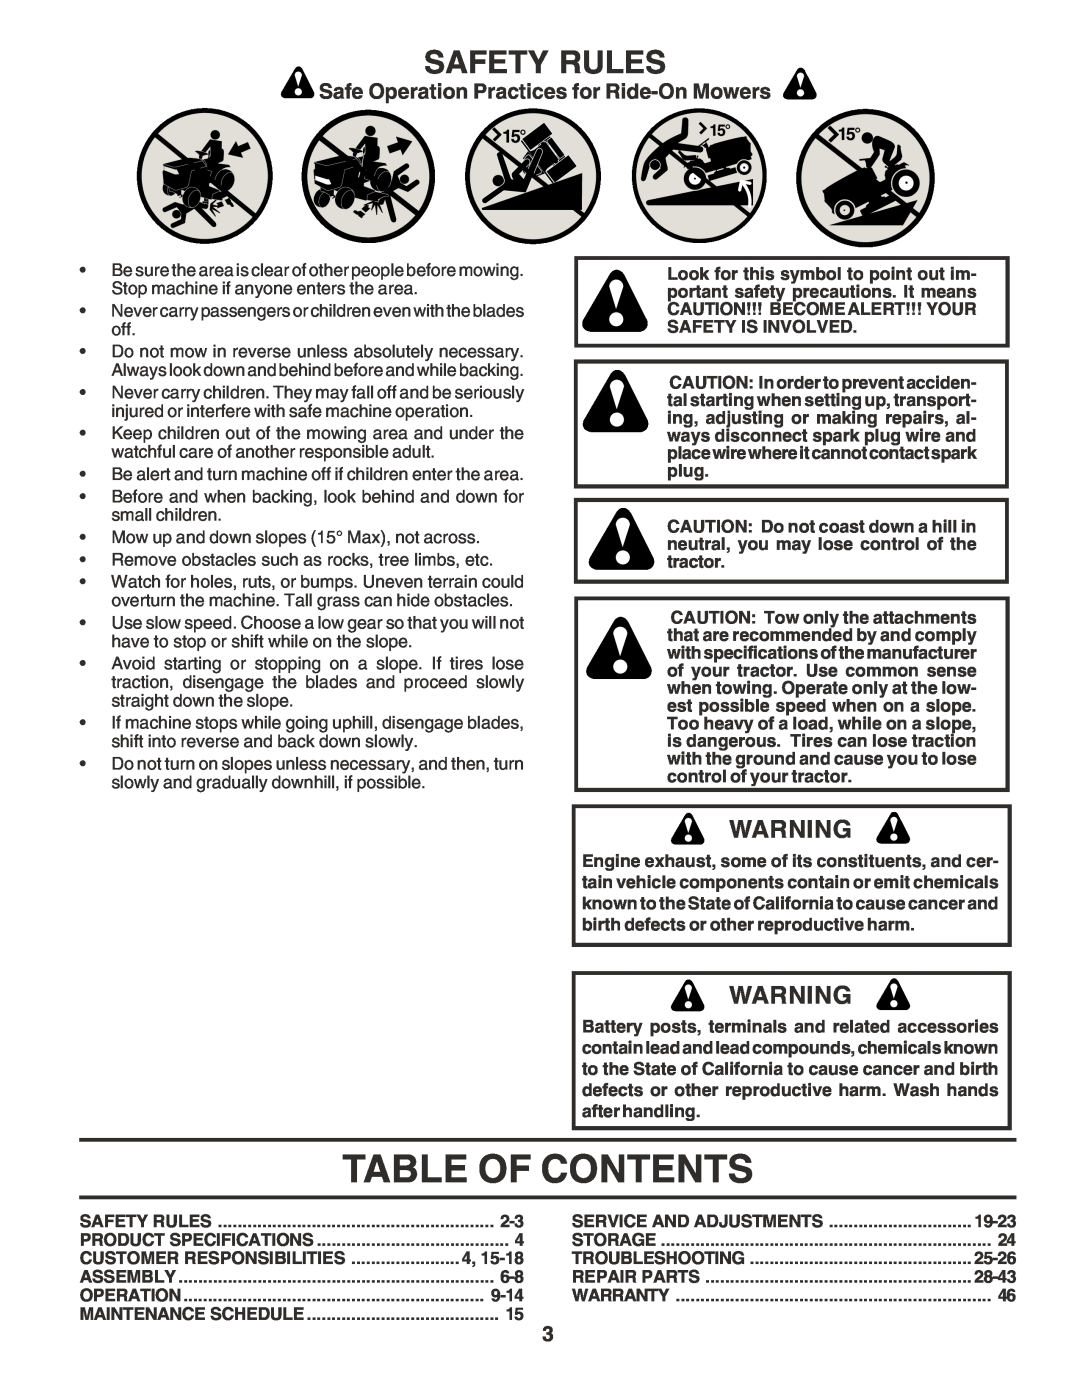 Poulan PPR2042STB Table Of Contents, Safety Rules, Safe Operation Practices for Ride-On Mowers, 9-14, 19-23, 25-26, 28-43 